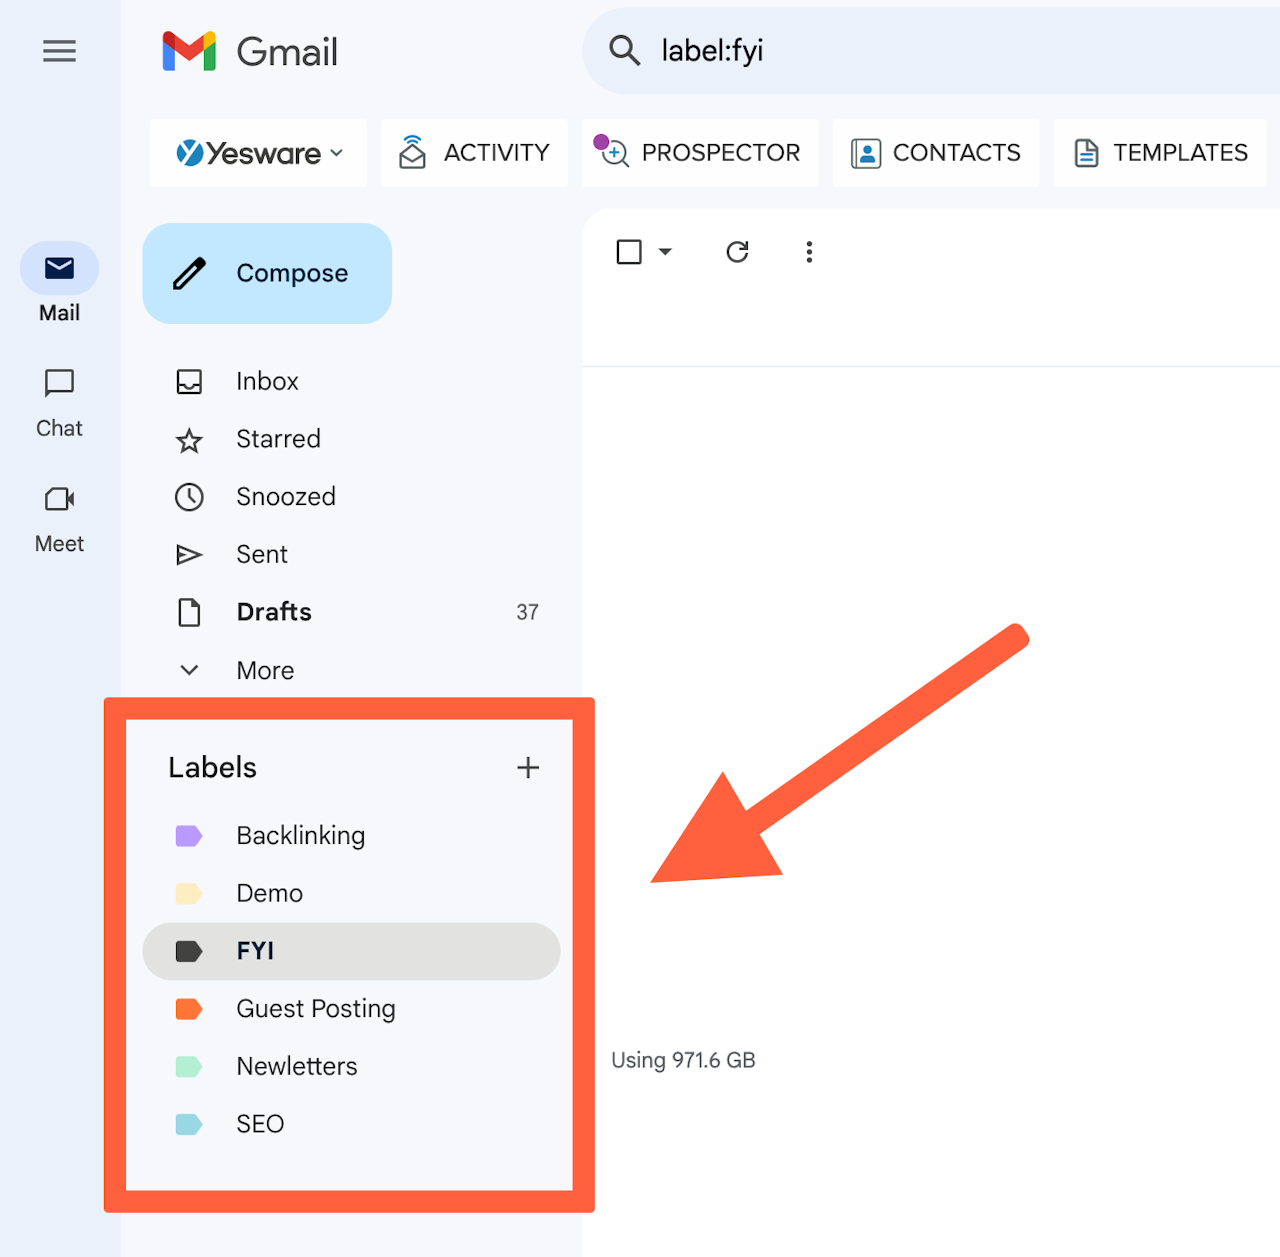 Email management: organizational tools - Gmail labels